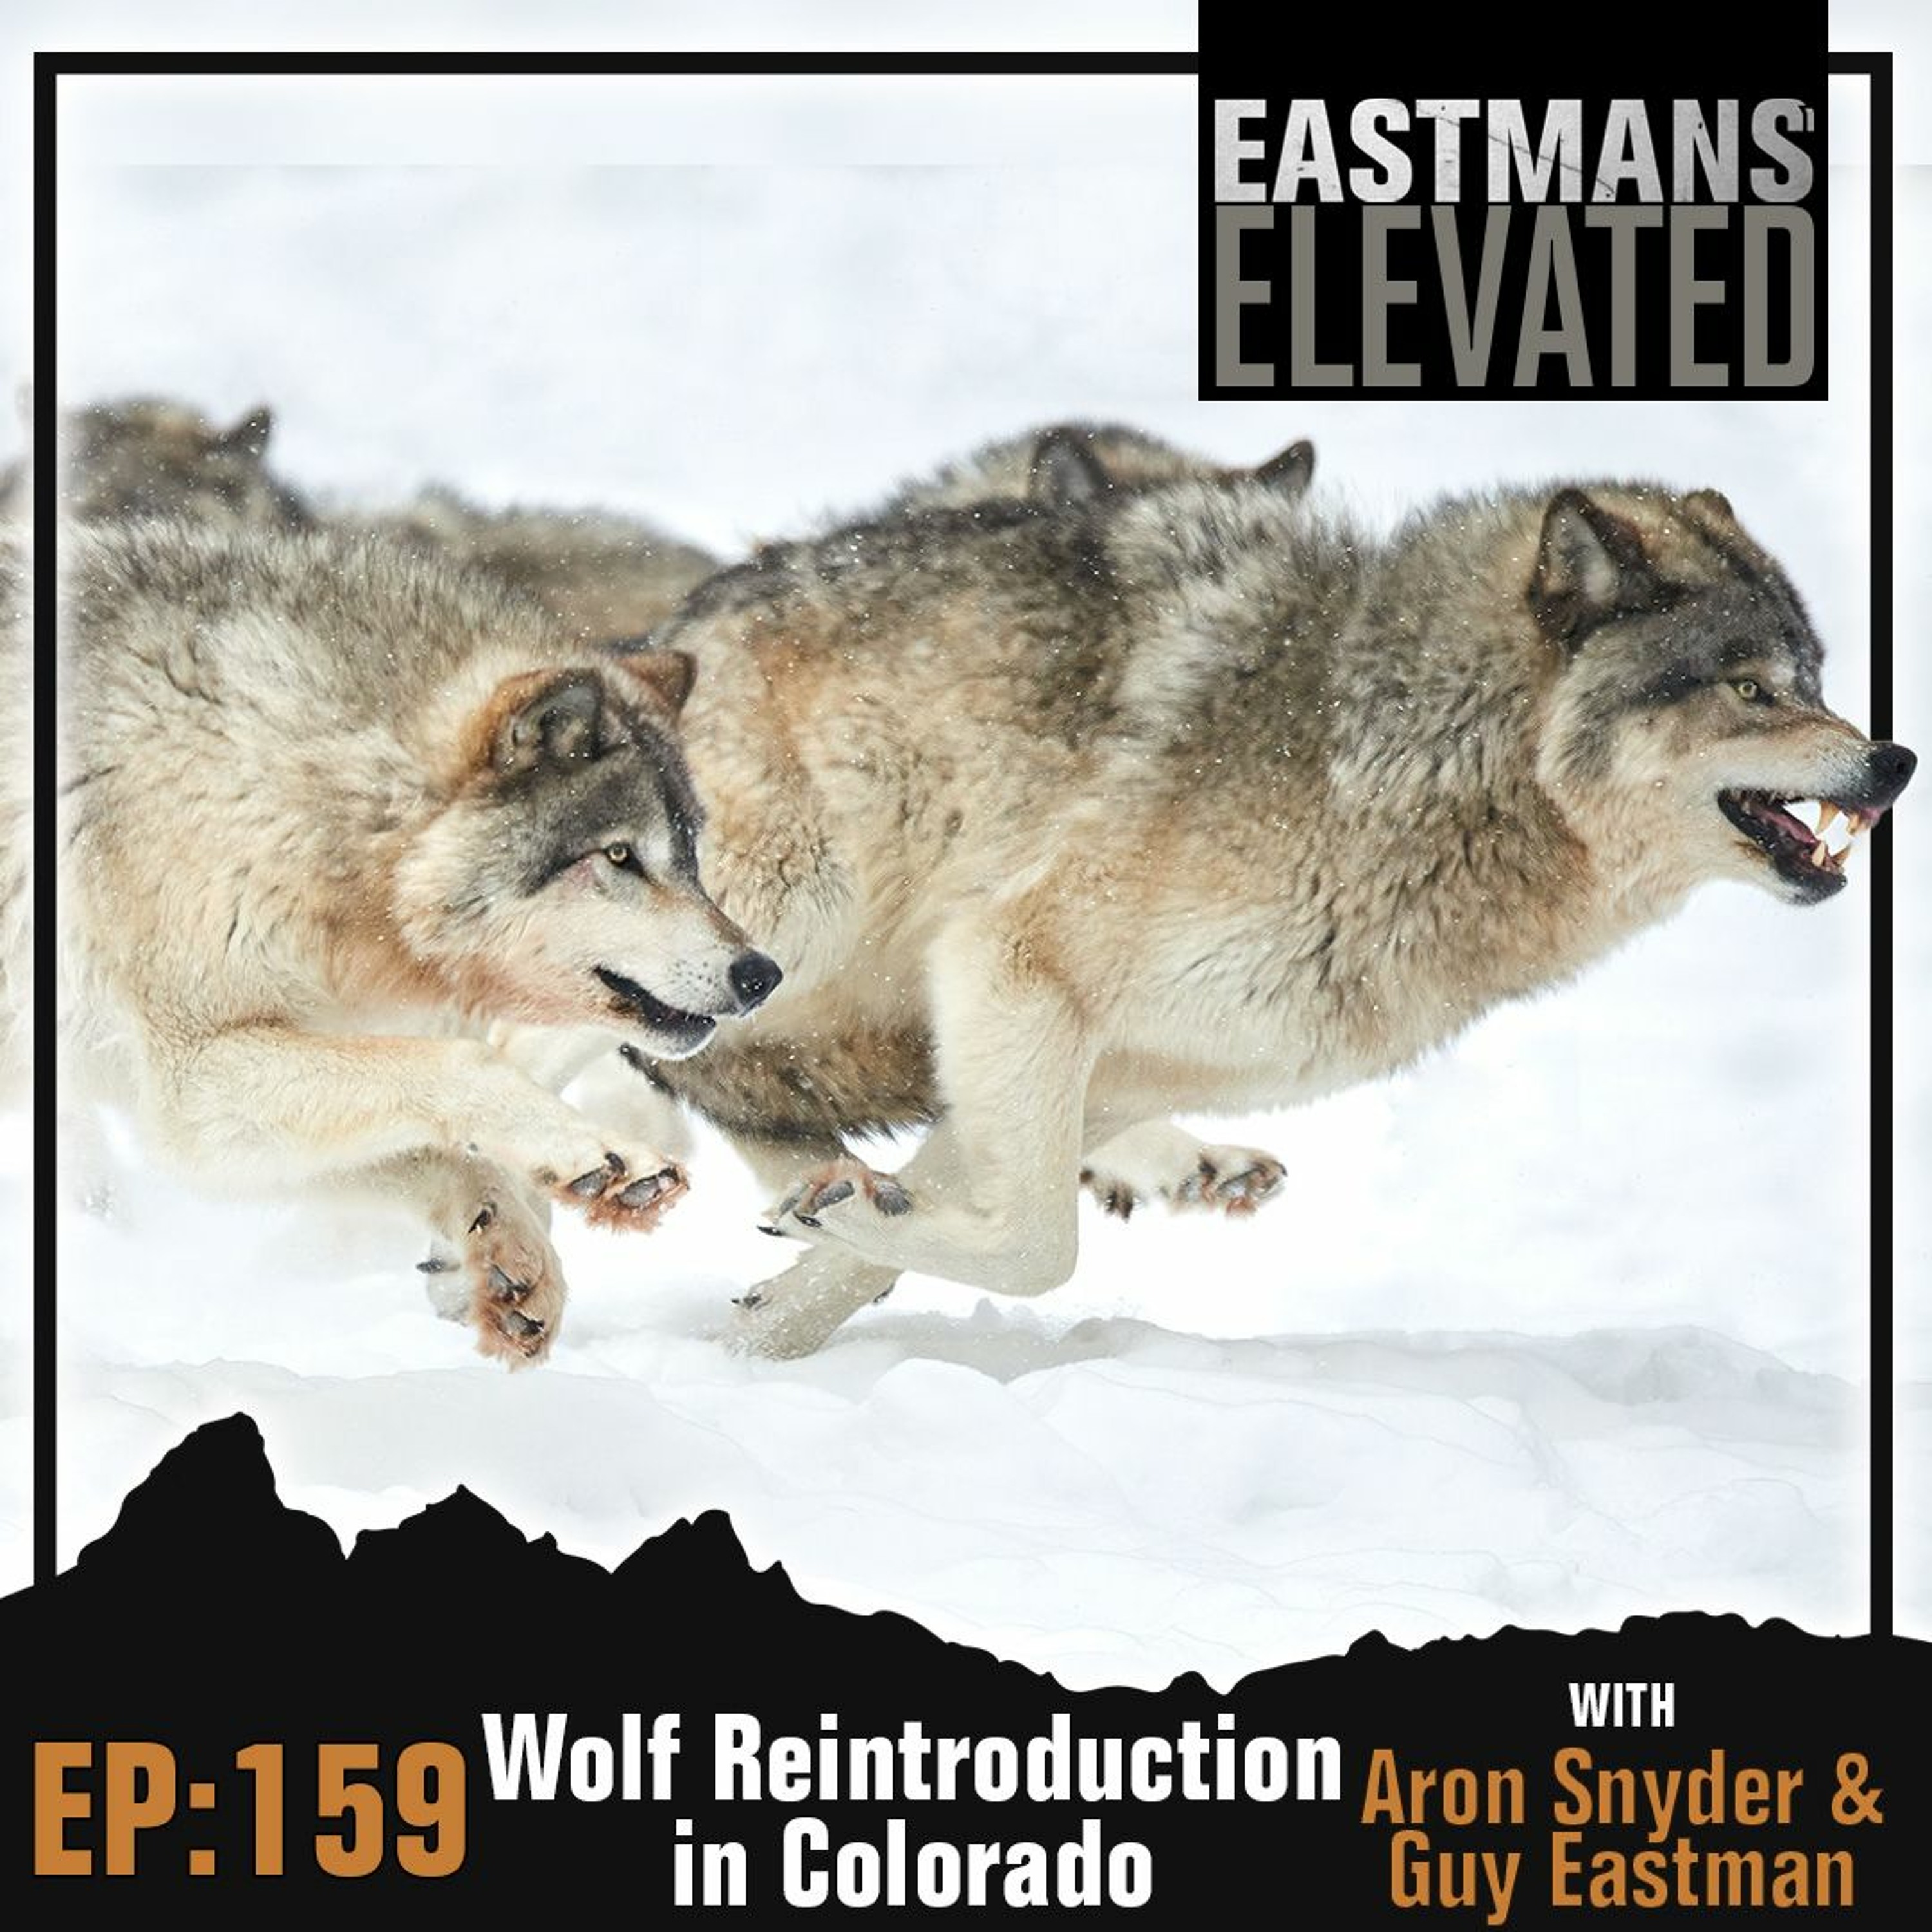 Episode 159: Reintroduction of Wolves in Colorado with Aron Snyder and Guy Eastman